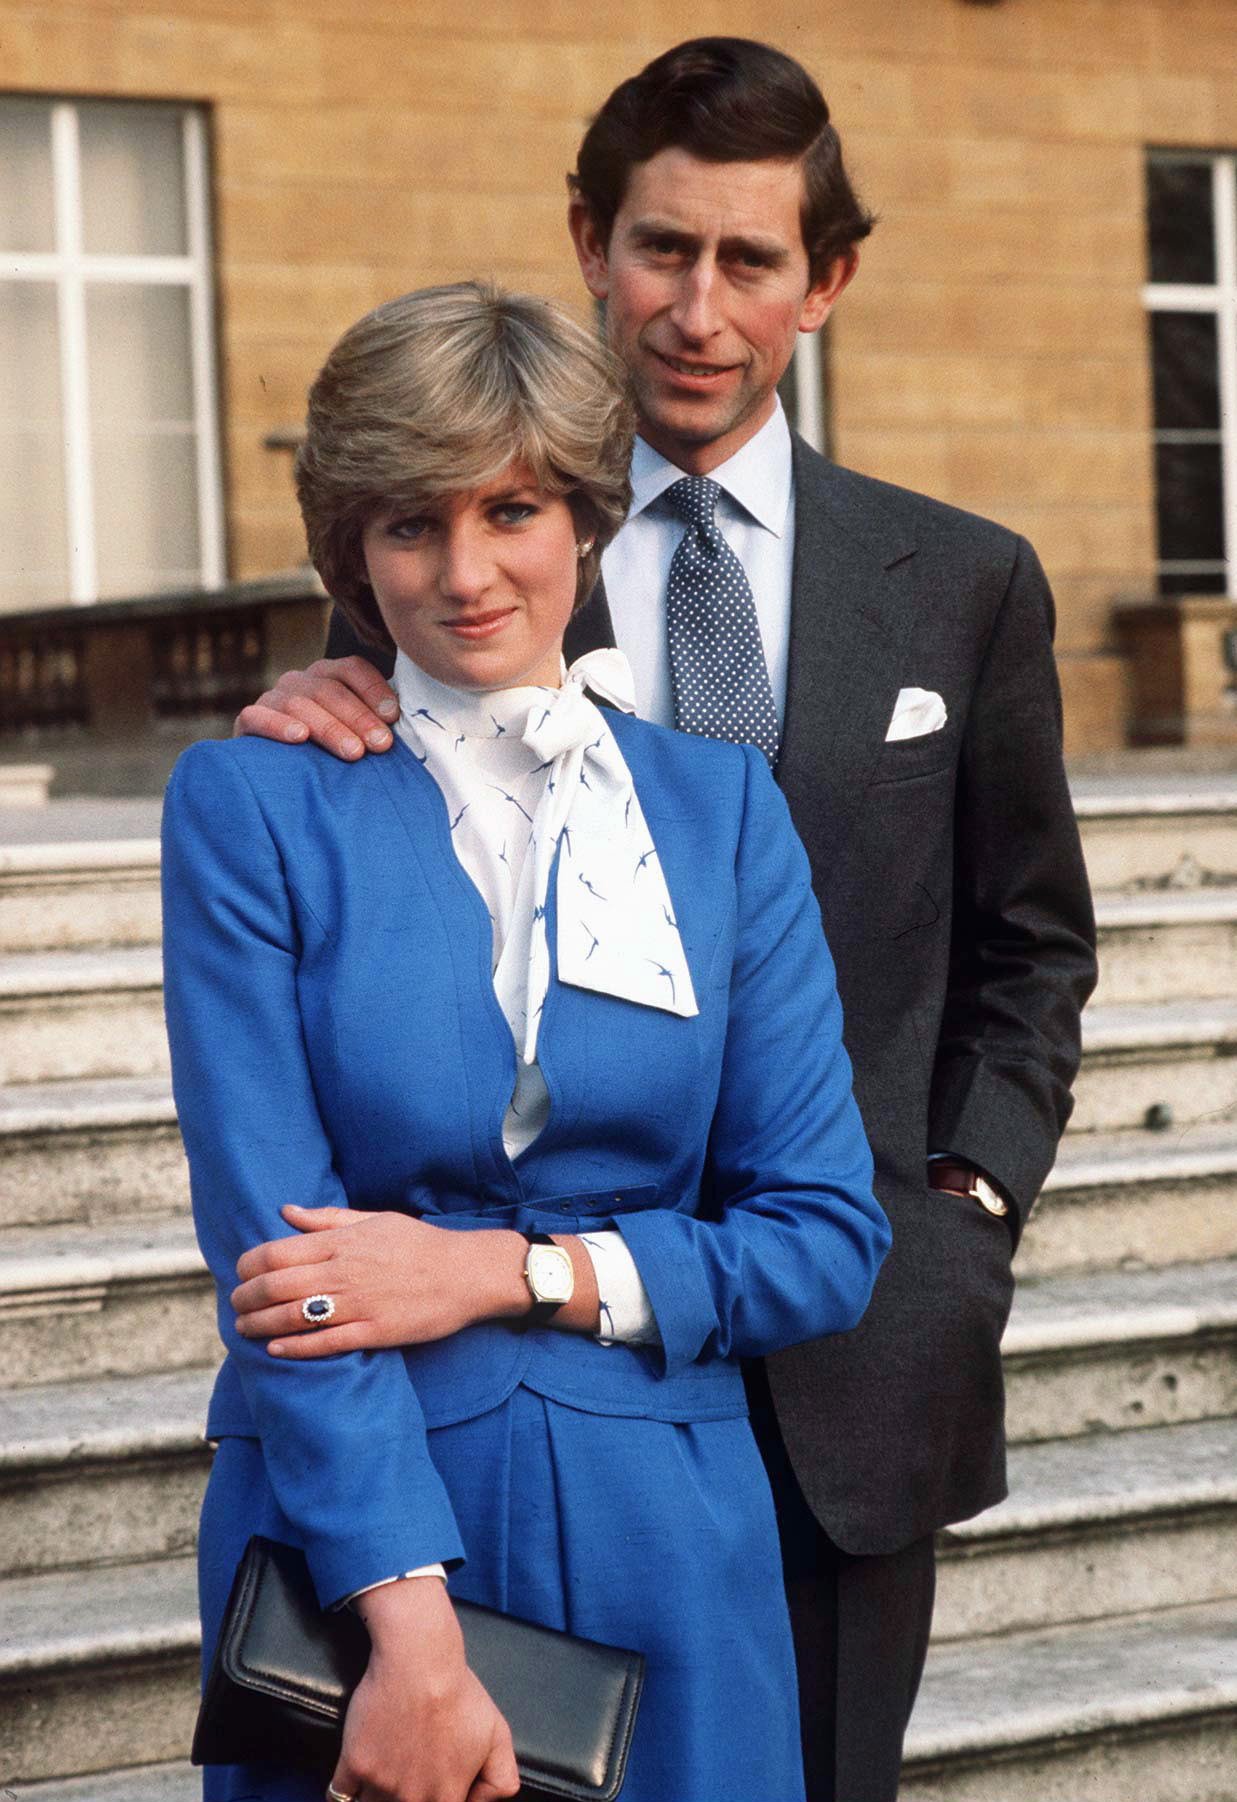 Princess Diana and King Charles III in London 1981. | Source: Getty Images